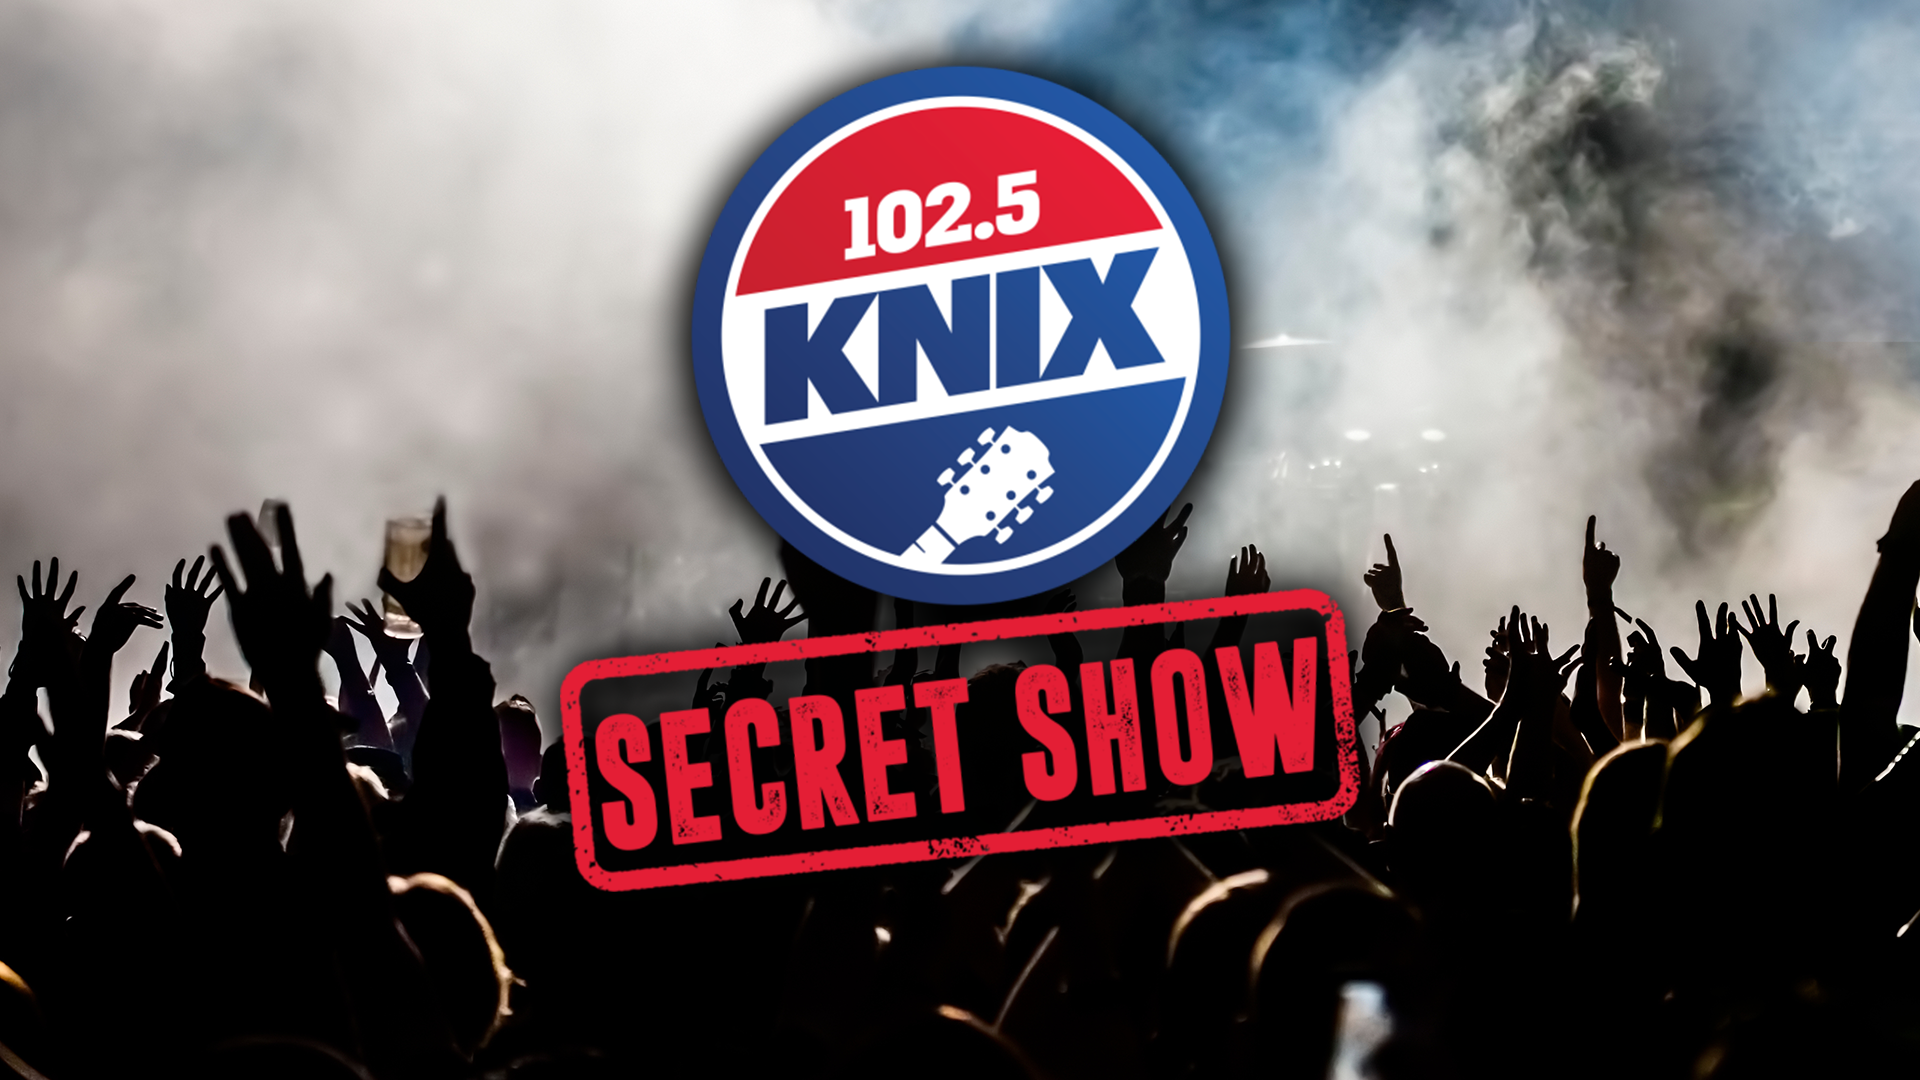 Our Sixth KNIX Secret Show Returns To Marquee Theatre On October 17th!